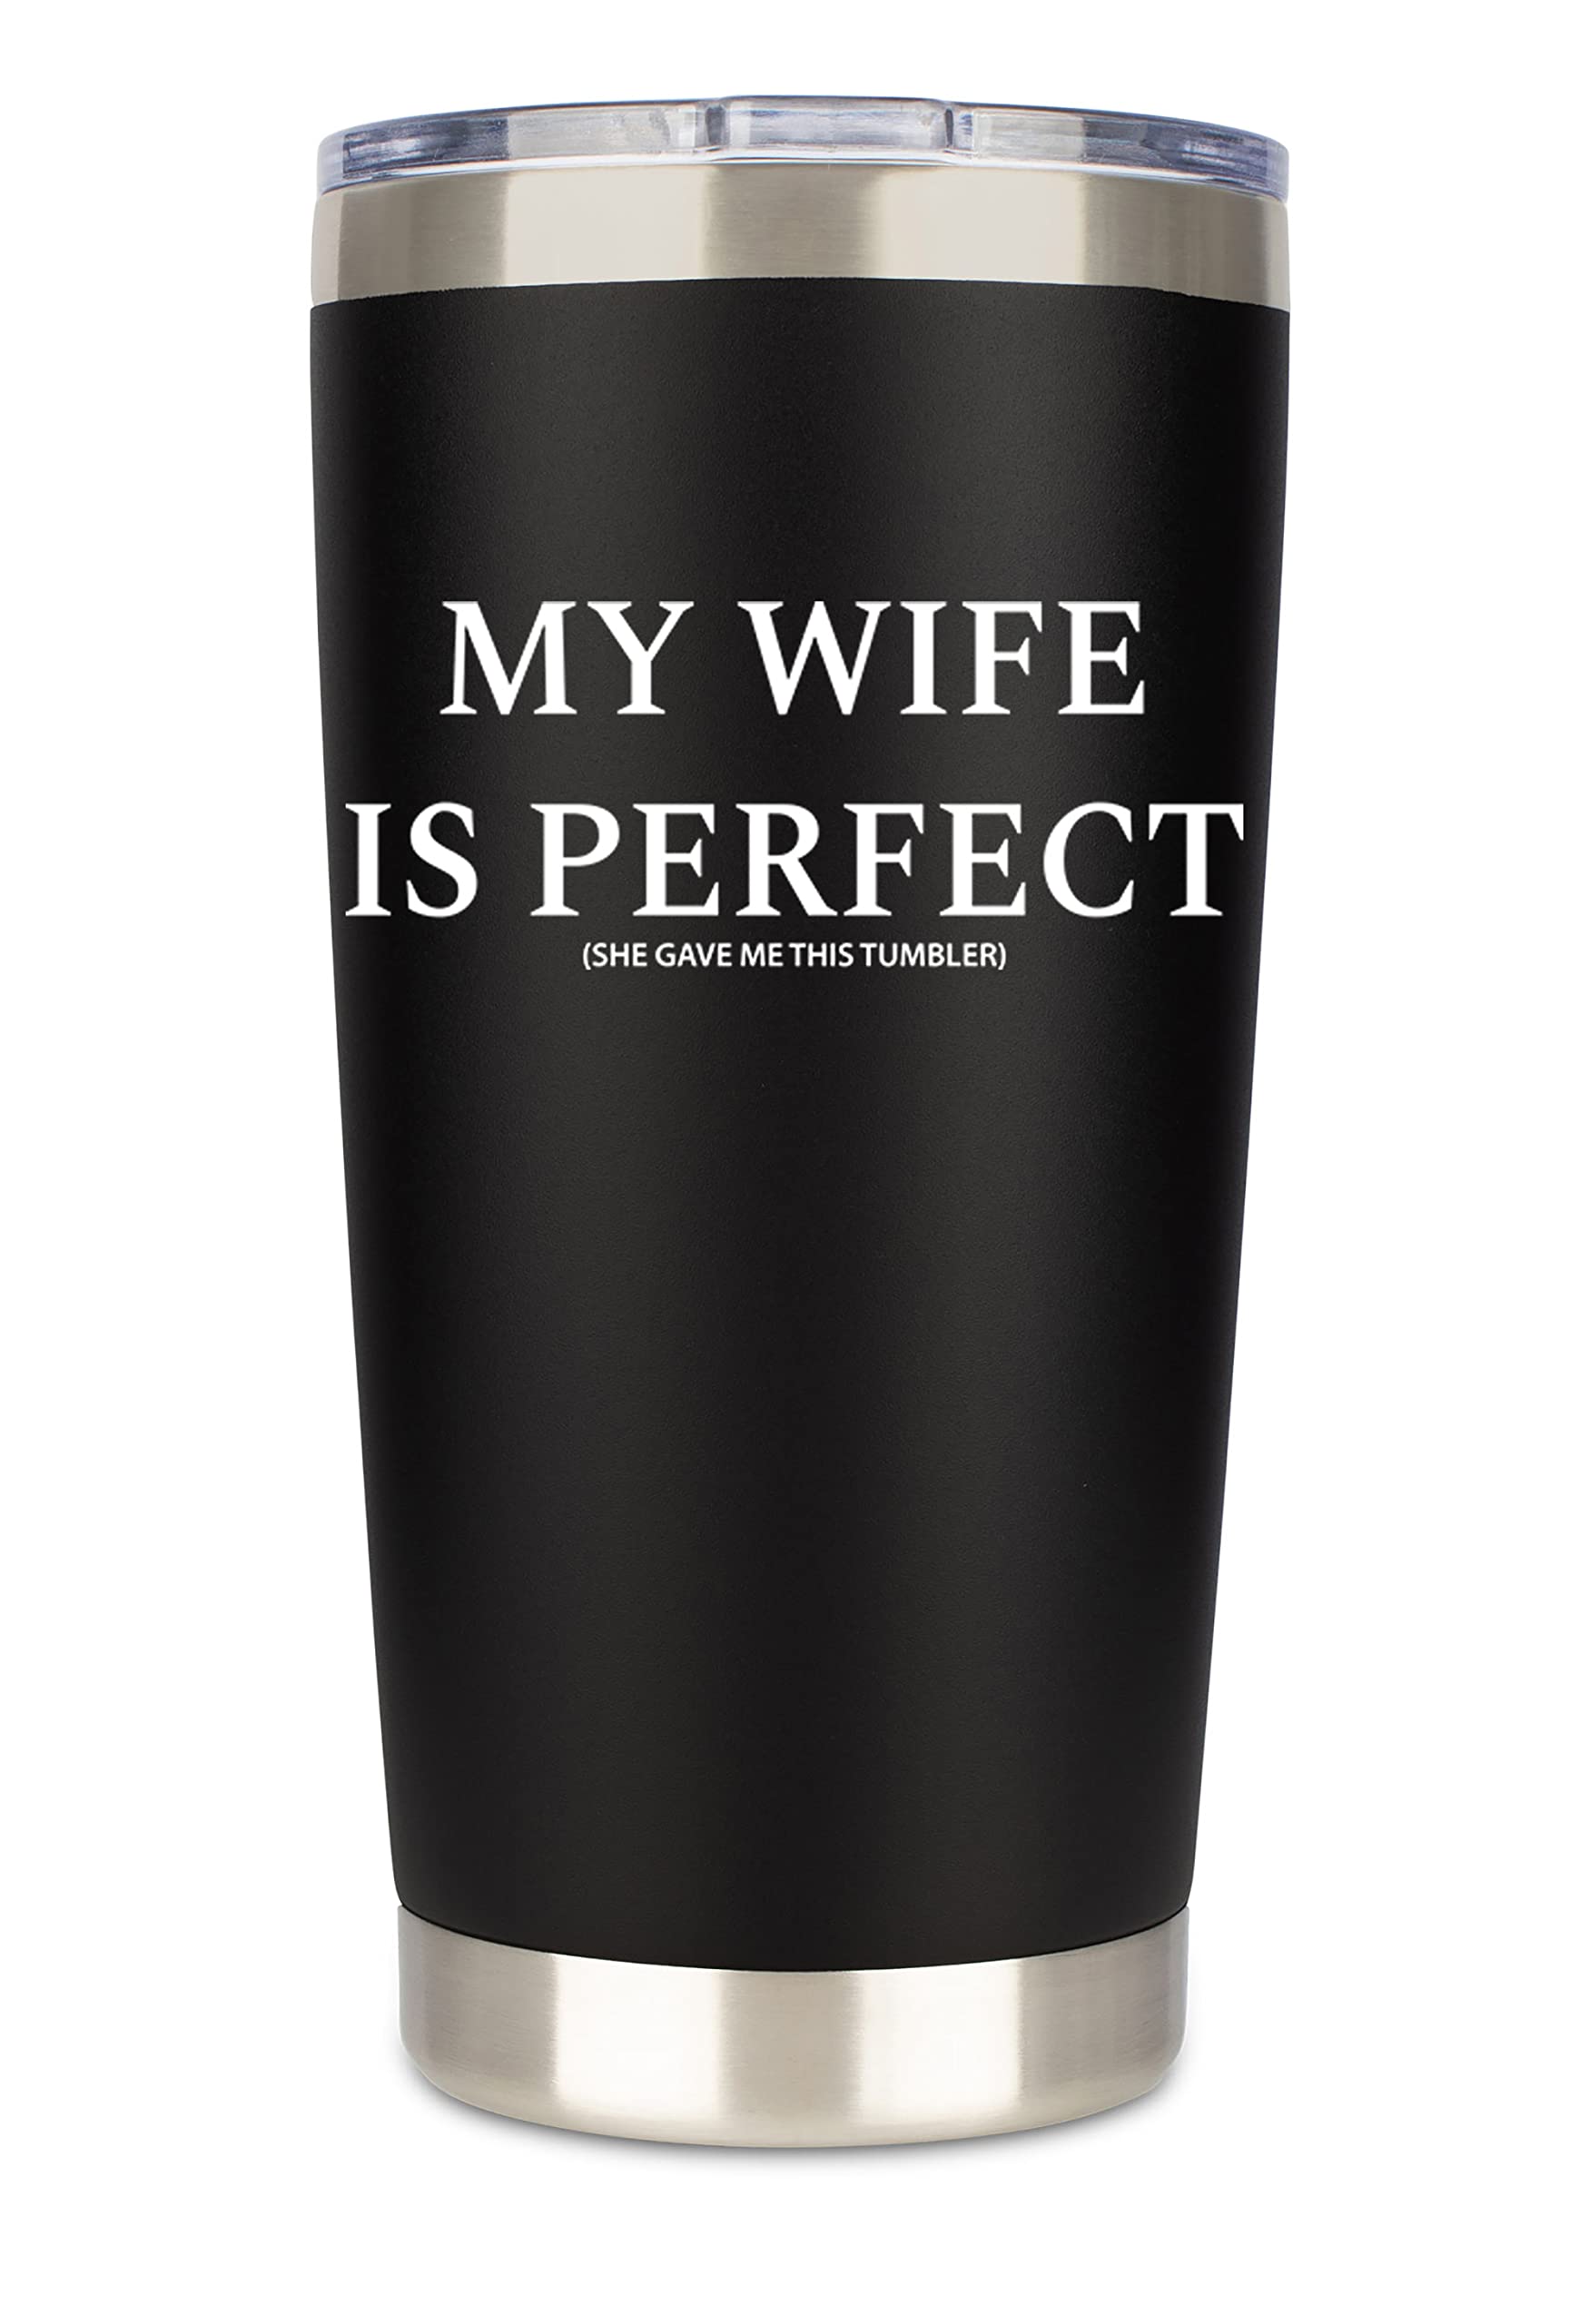 JENVIO Husband Gifts from Wife | My Wife is Perfect | Stainless Steel Travel Tumbler with 2 Lids 2 Straws Gift Box and Card | Funny Cup Happy For Mens From Anniversary Stuff Valentine's Day Gift